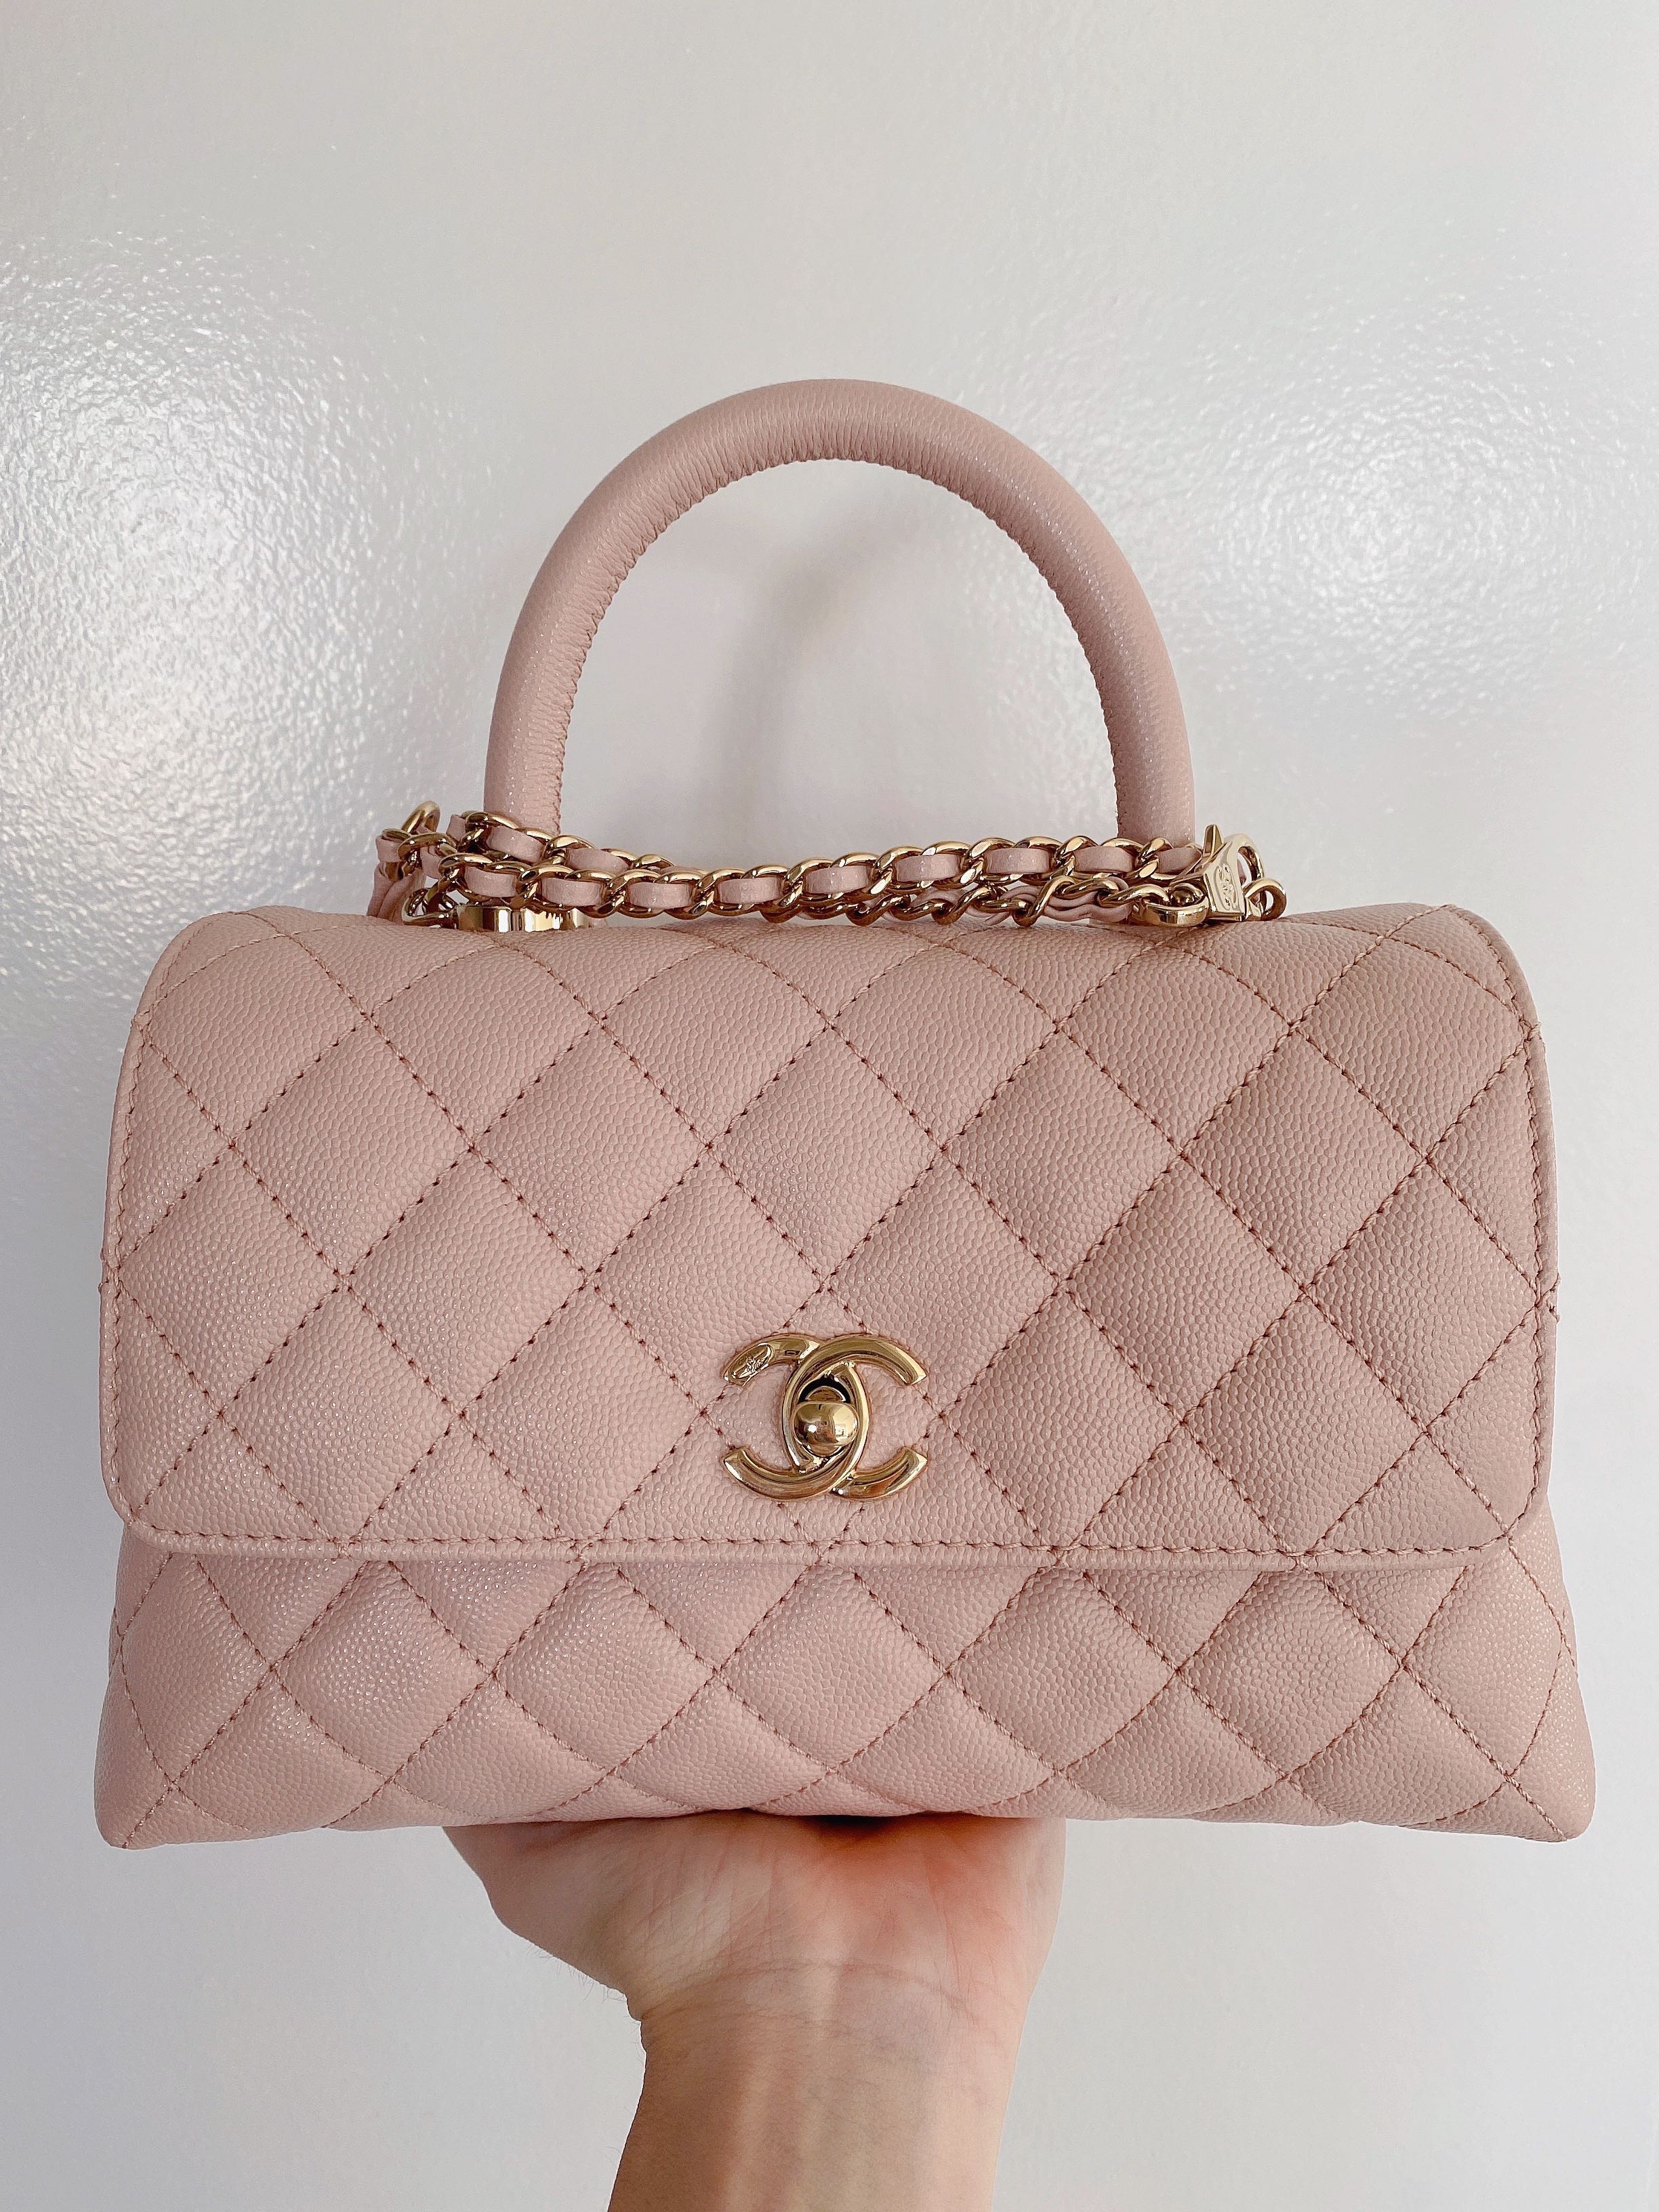 coco chanel bags new small